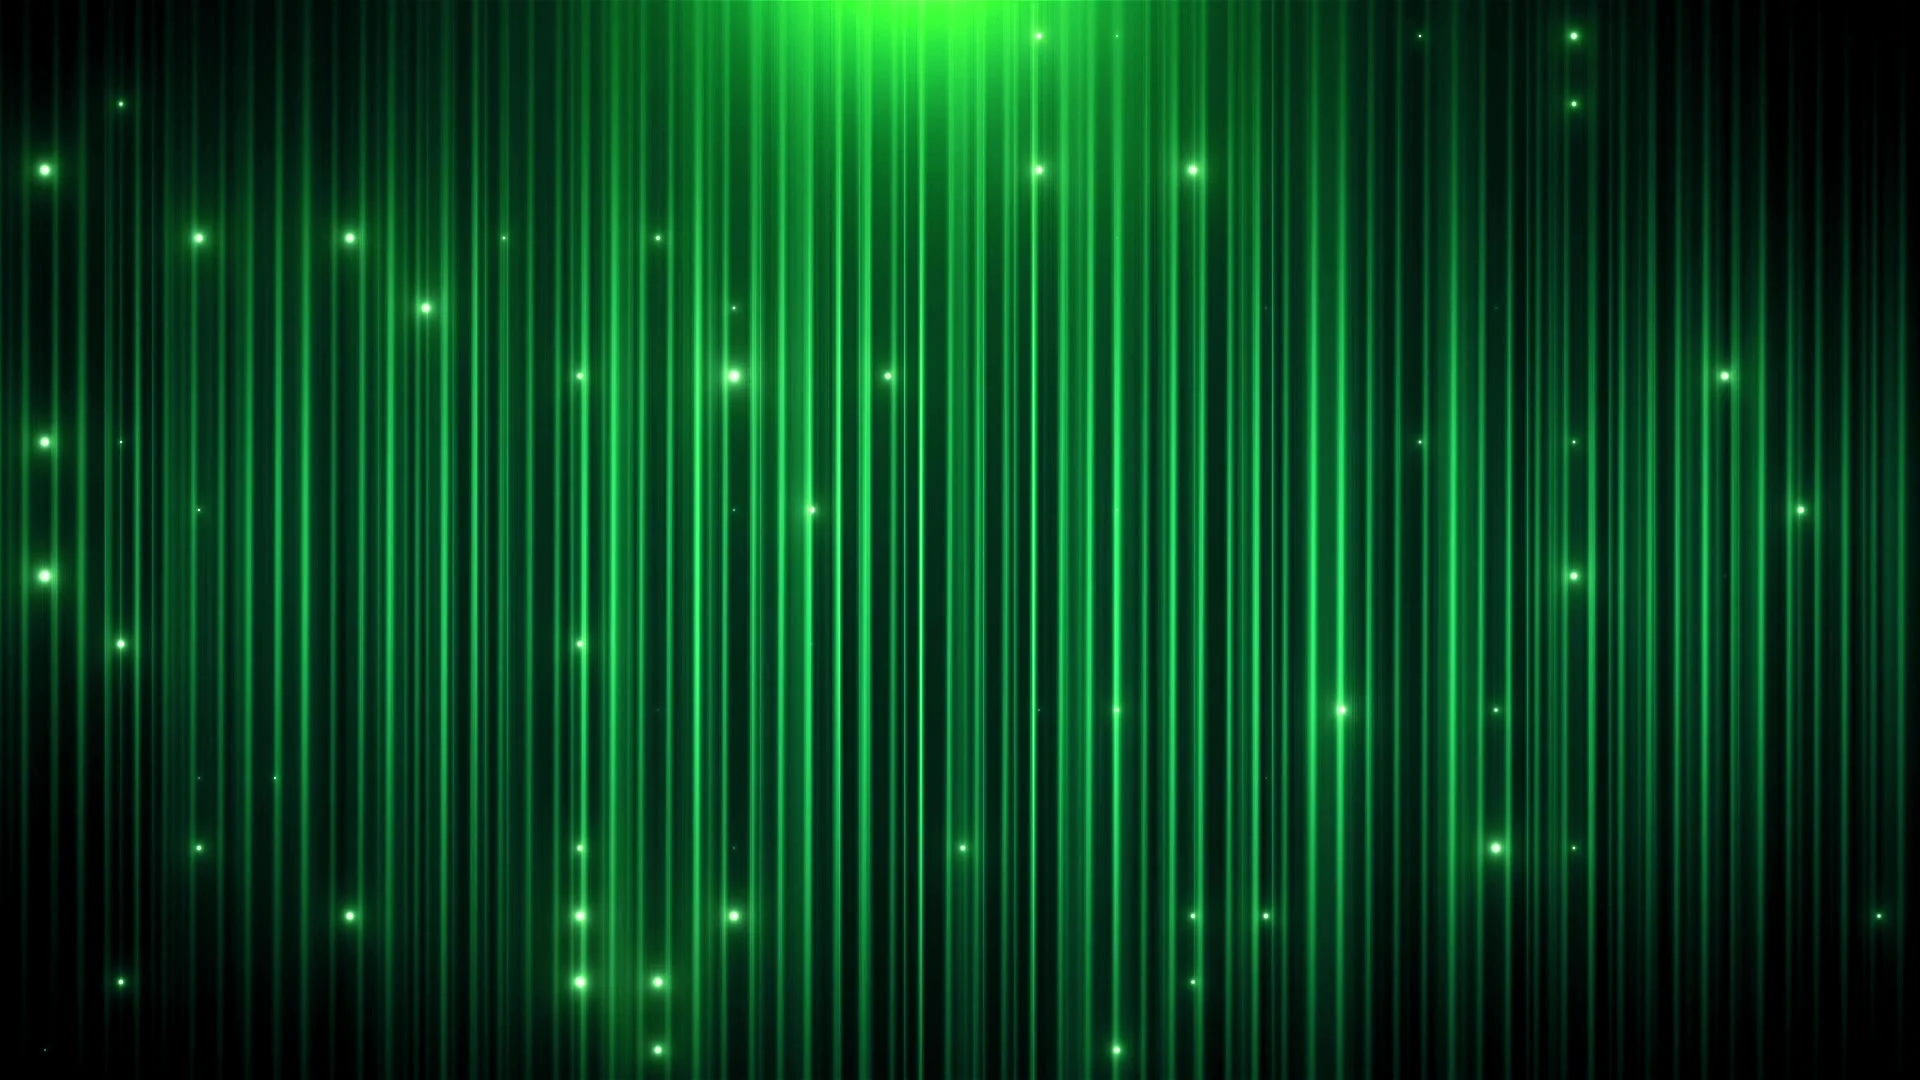 Animated green glitter background, Stock Video